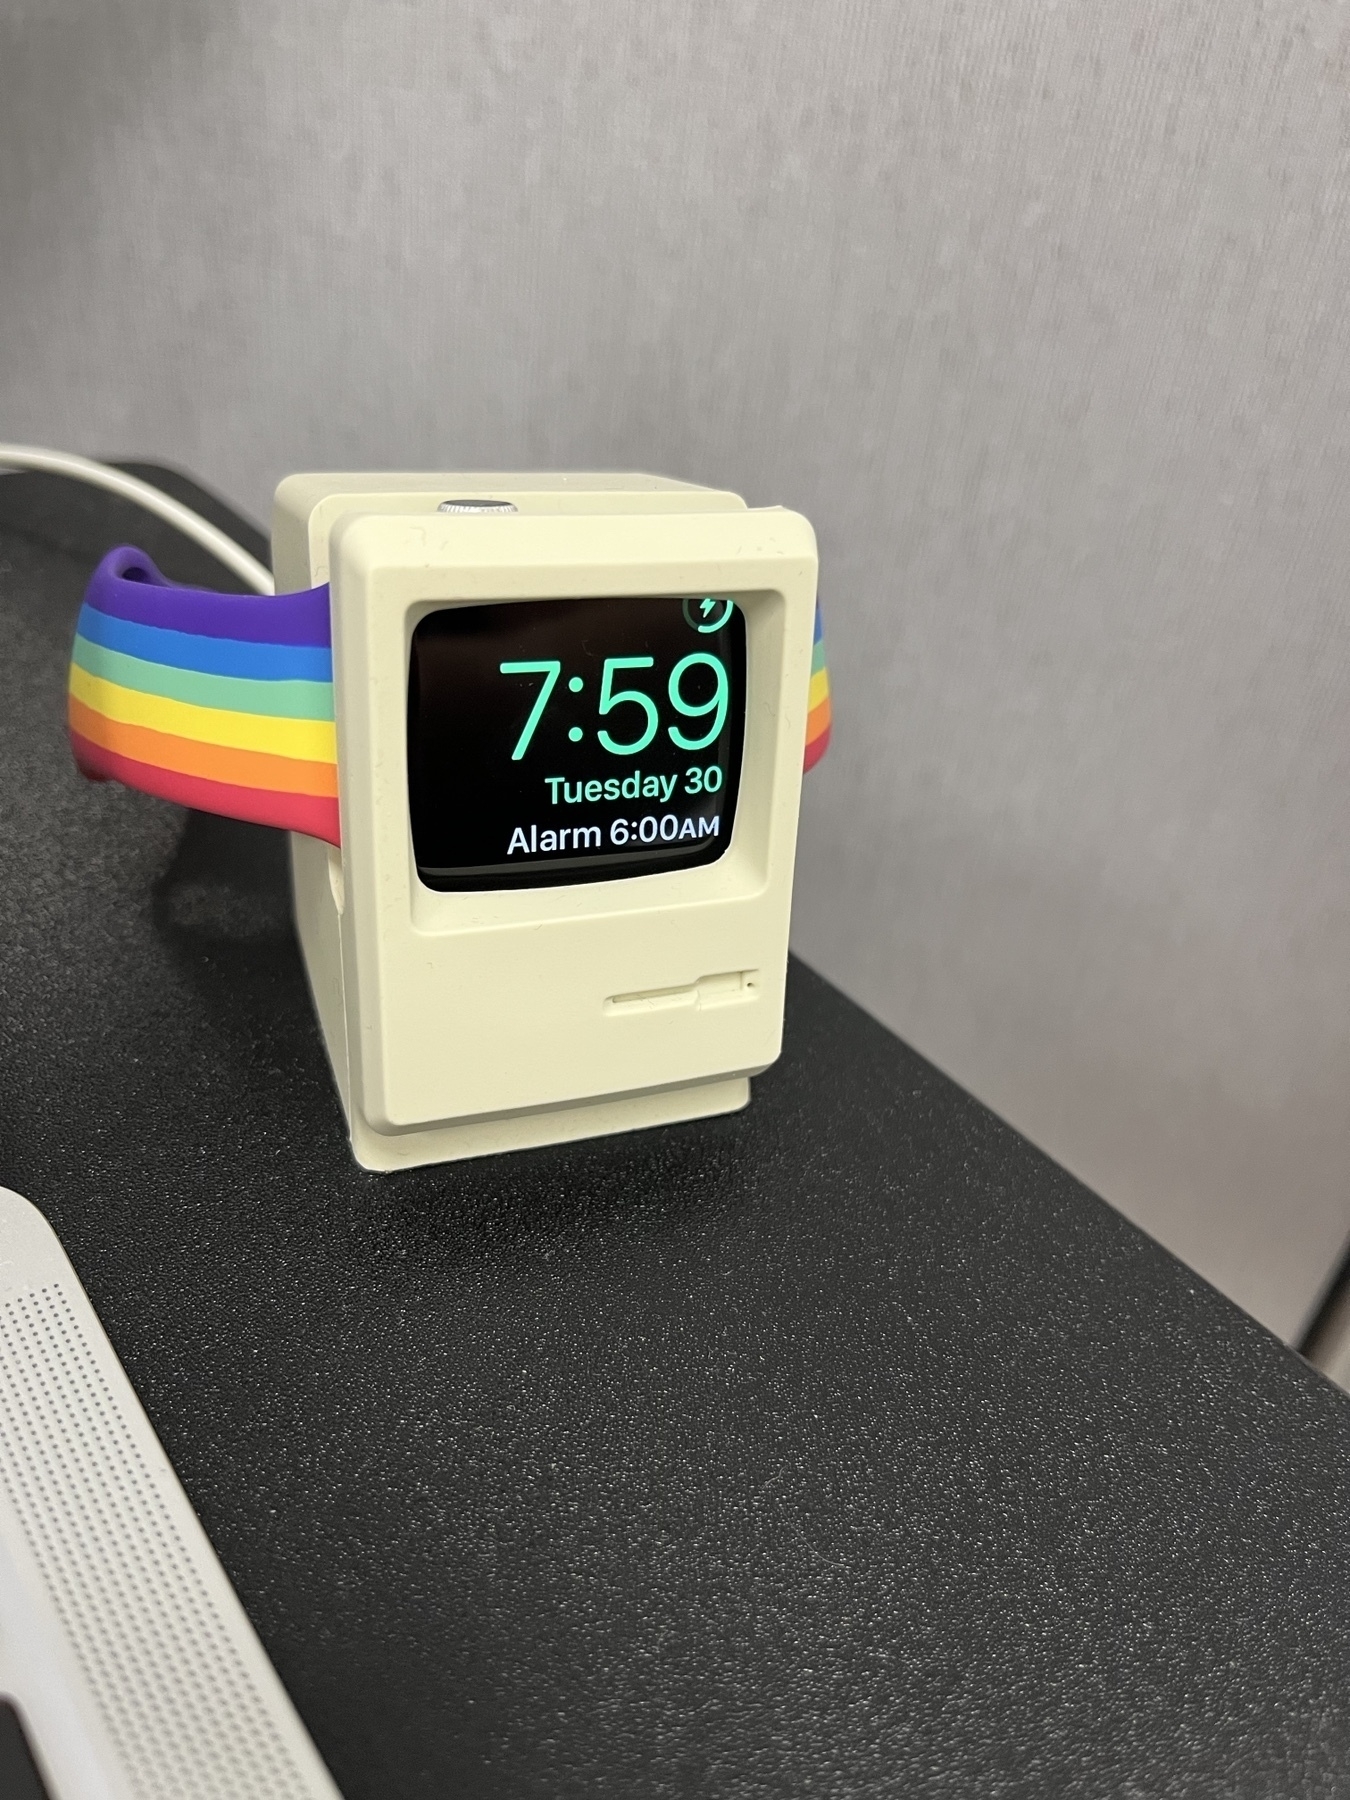 An apple watch with a pride armband is in clock mode in a stand that looks like an original Macintosh.